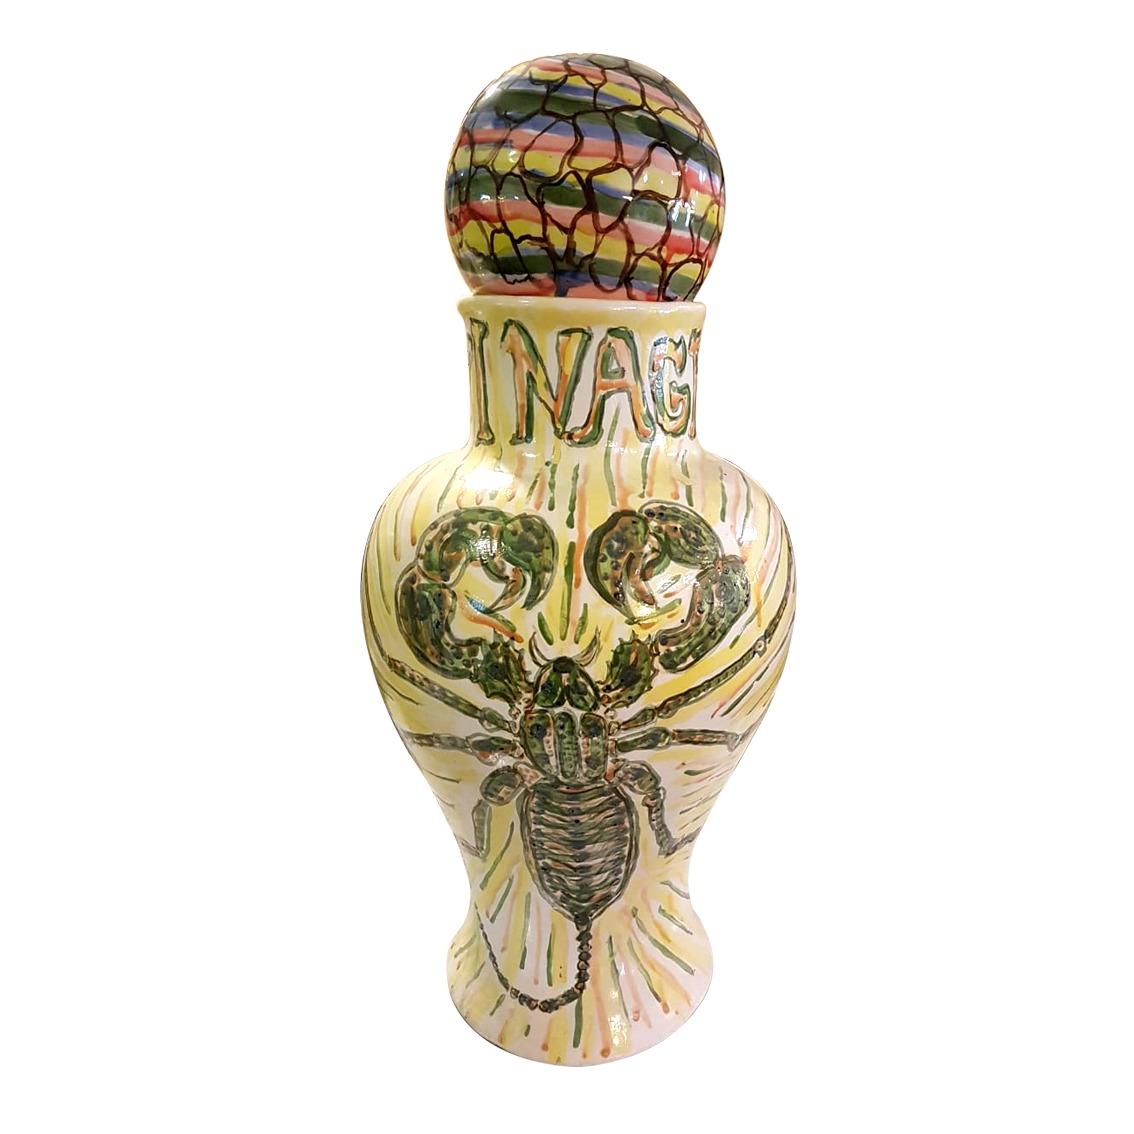 A rare Cisco Jiménez hand painted ceramic jar depicting a whip scorpion with a sphere on top. Signed and dated 2011.

Born in Cuernavaca, México in 1969, Cisco Jiménez is a multidisciplinary artist whose body of work includes painting, sculpture,